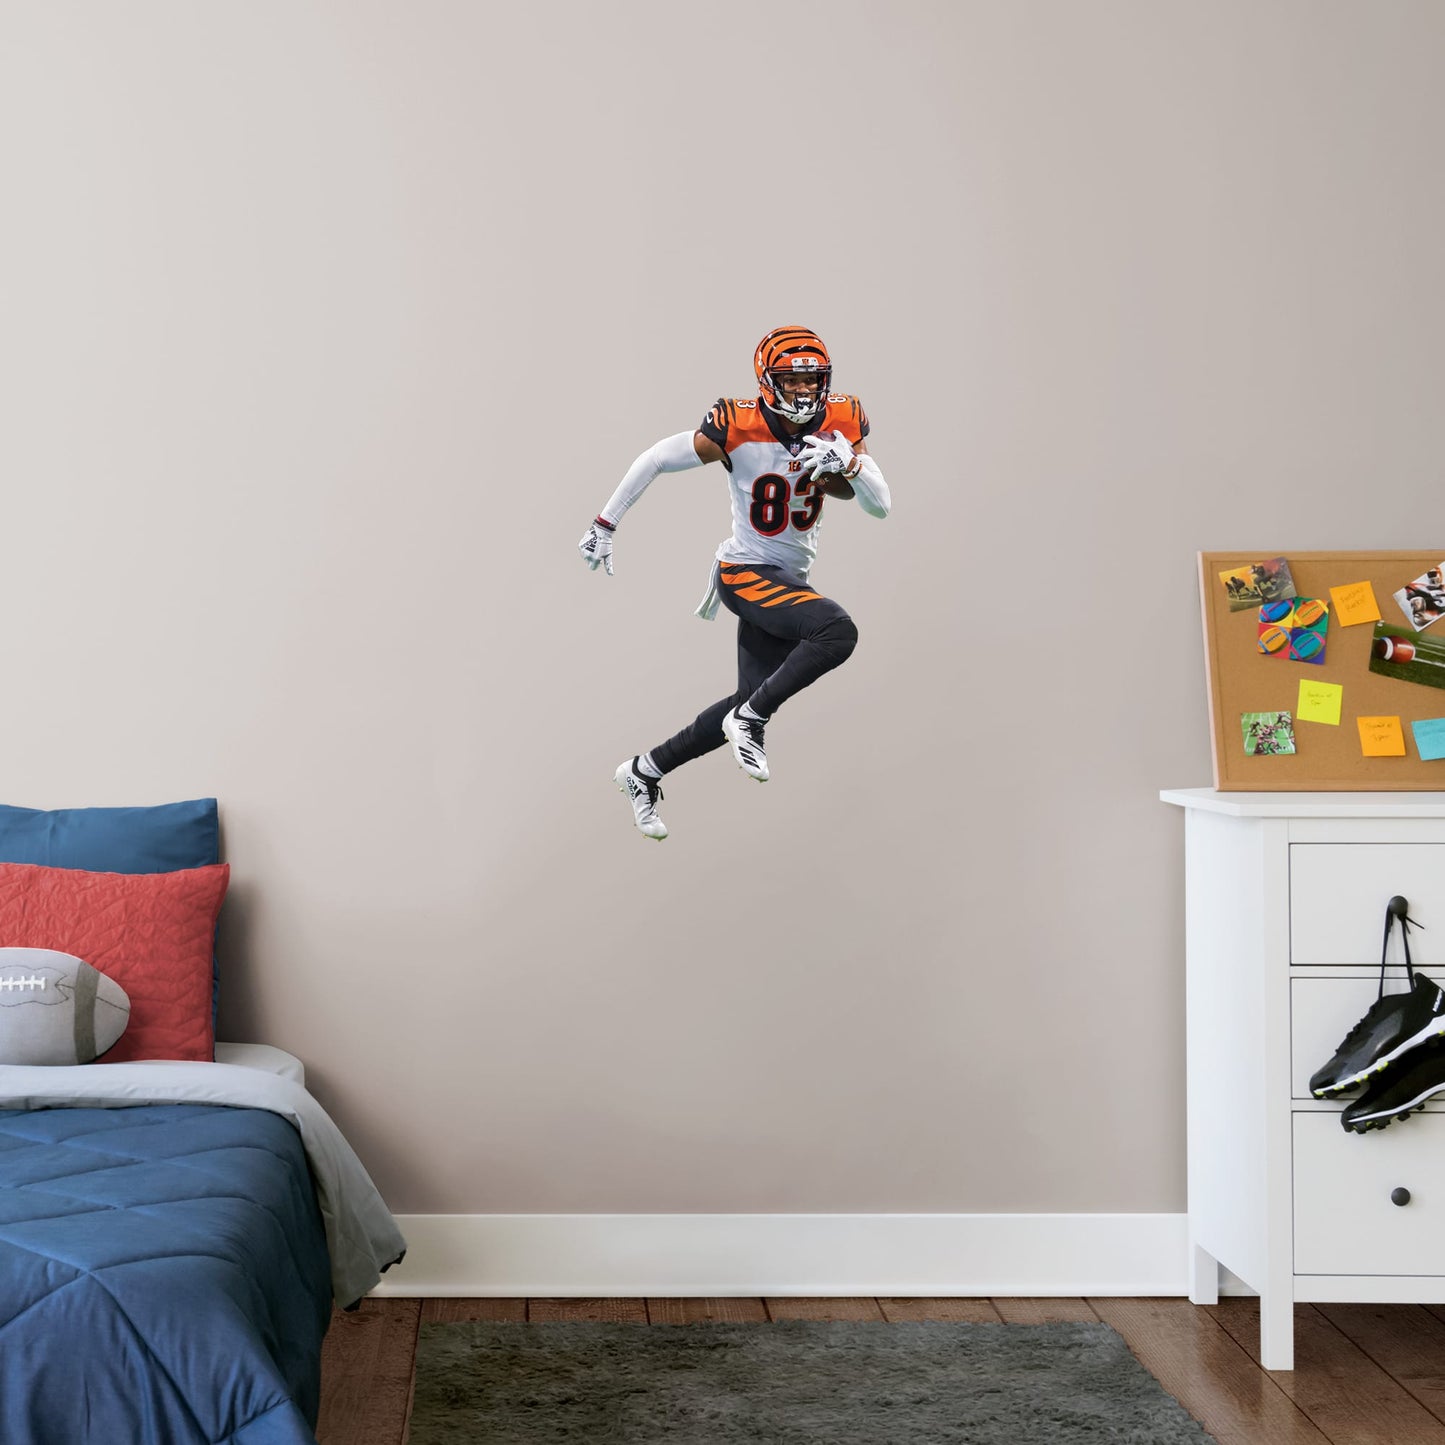 X-Large Athlete + 2 Decals (23"W x 38"H) Bring the action of the NFL into your home with a wall decal of Tyler Boyd! High quality, durable, and tear resistant, you'll be able to stick and move it as many times as you want to create the ultimate football experience in any room!